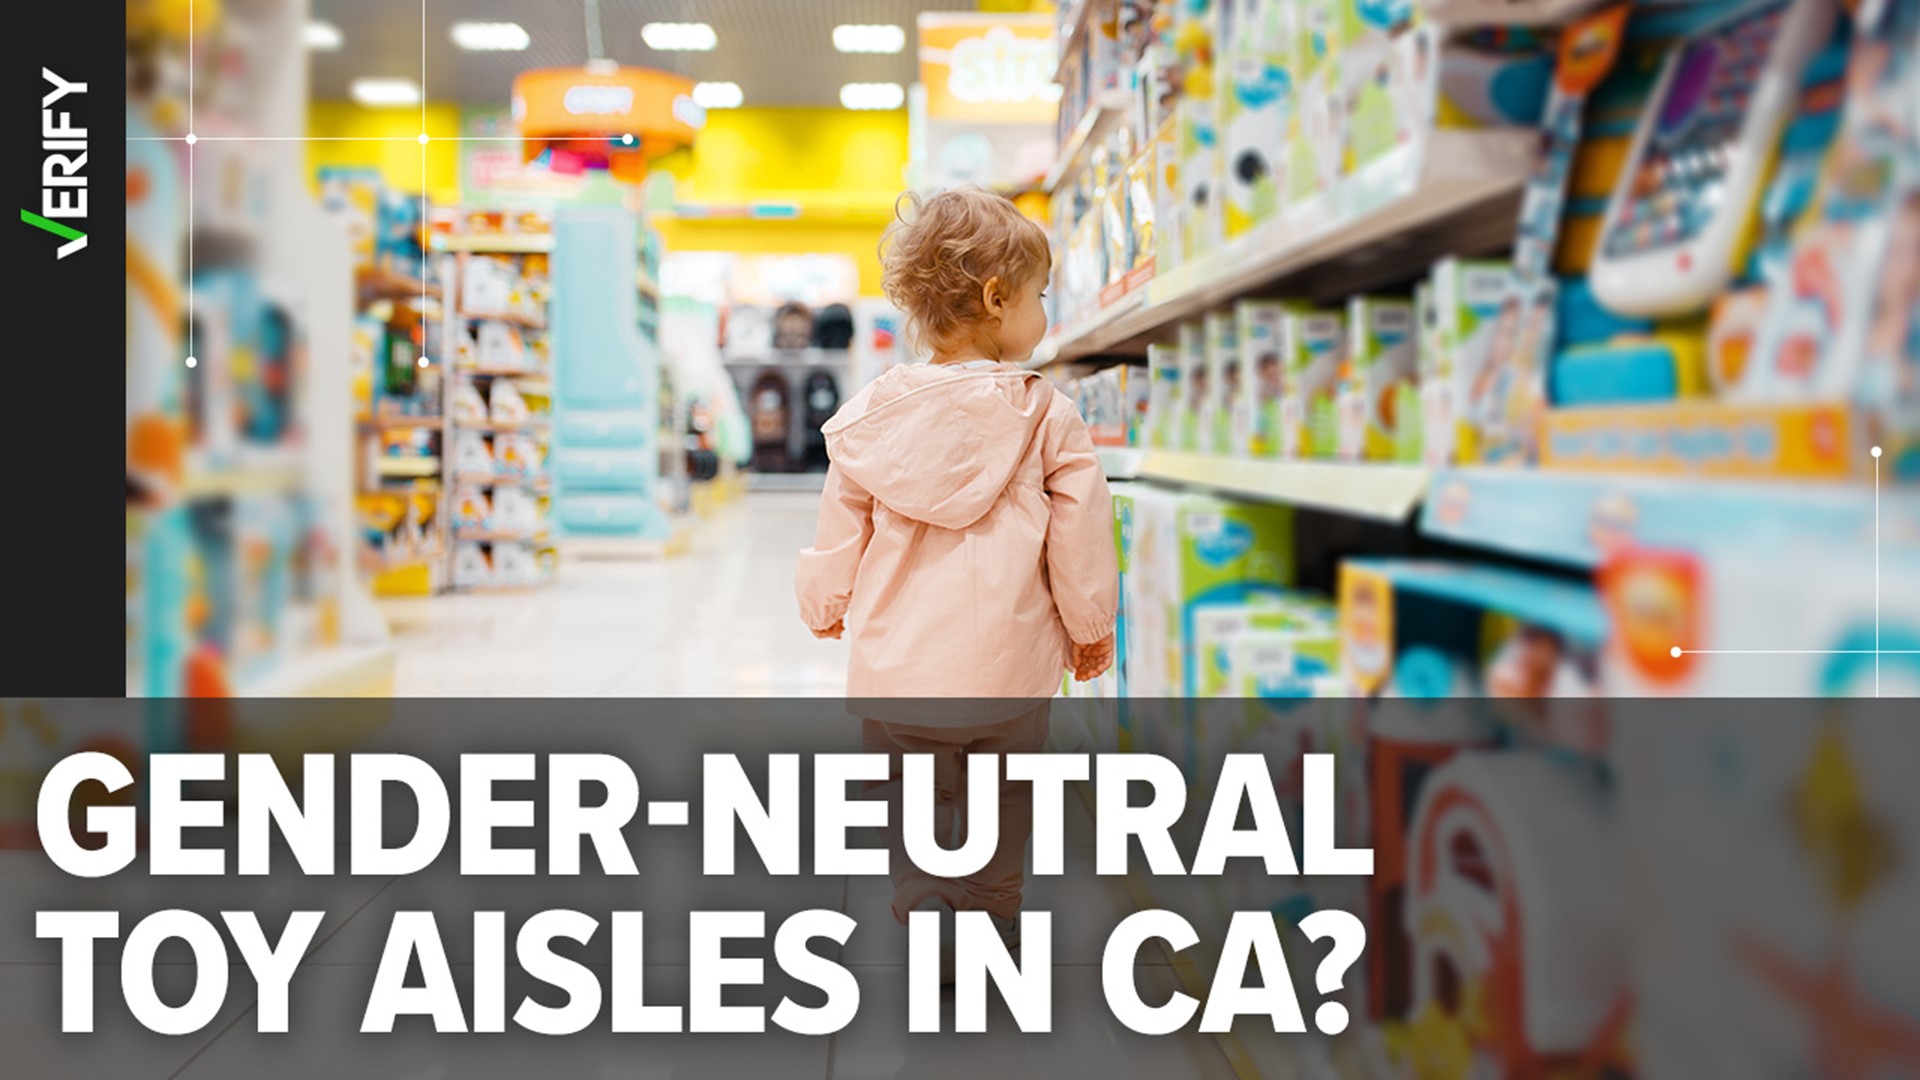 Under a new California law, retailers that sell toys will face up to $500 in fines if they fail to offer a gender-neutral toy section in their stores.